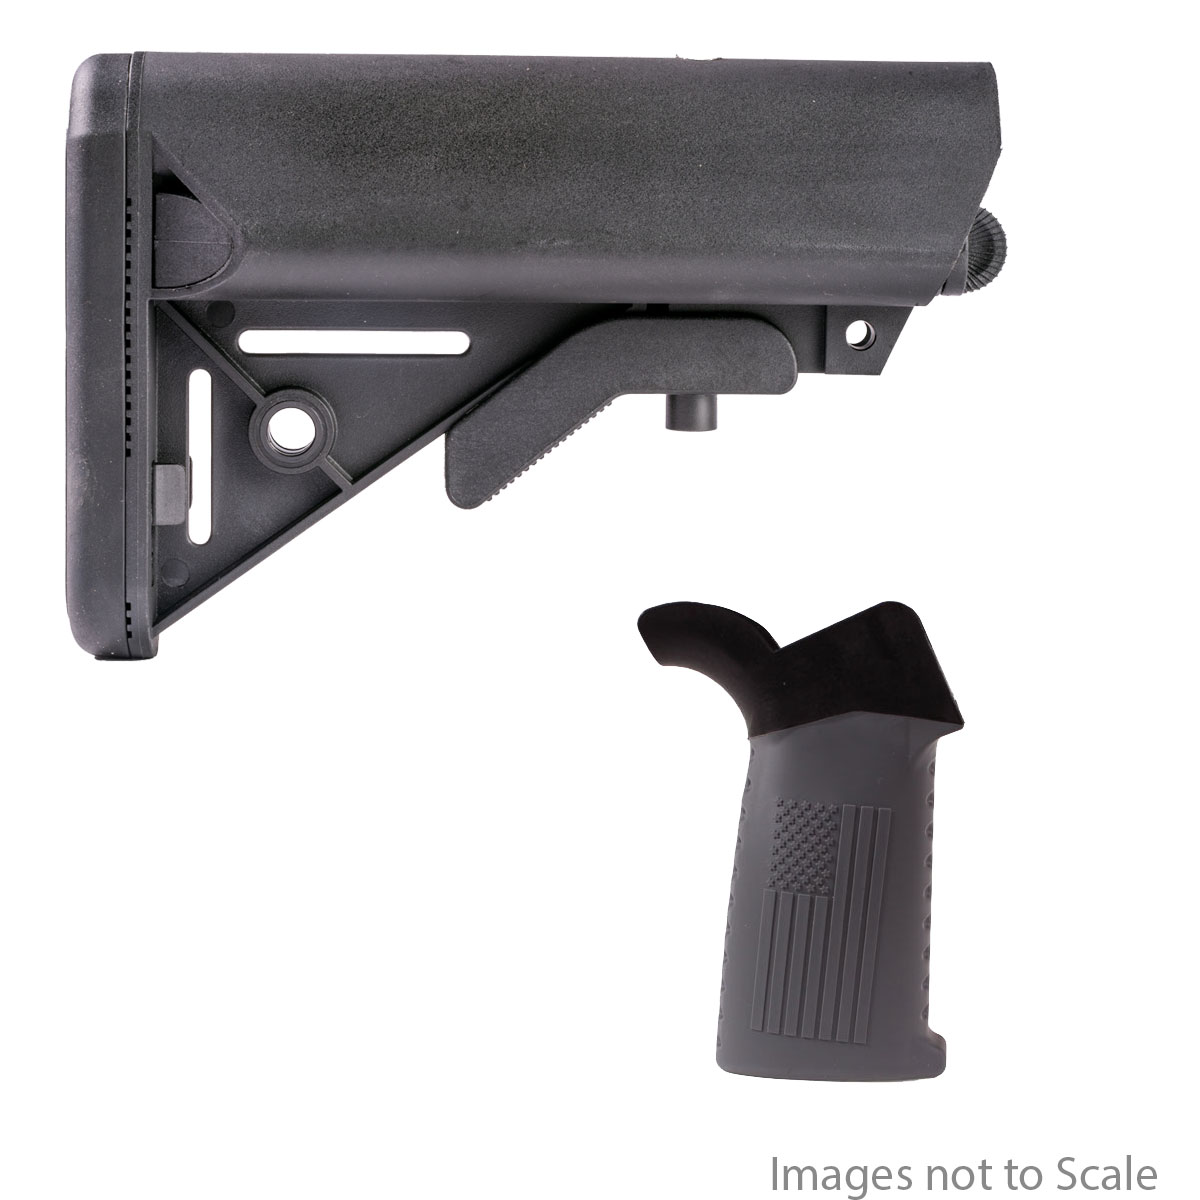 Furniture Upgrade Kit: Team Accessories Corp Grid Grip Flared Flag (gray) + Gauntlet Arms SOPMOD Style Collapsible Stock with Storage Compartments